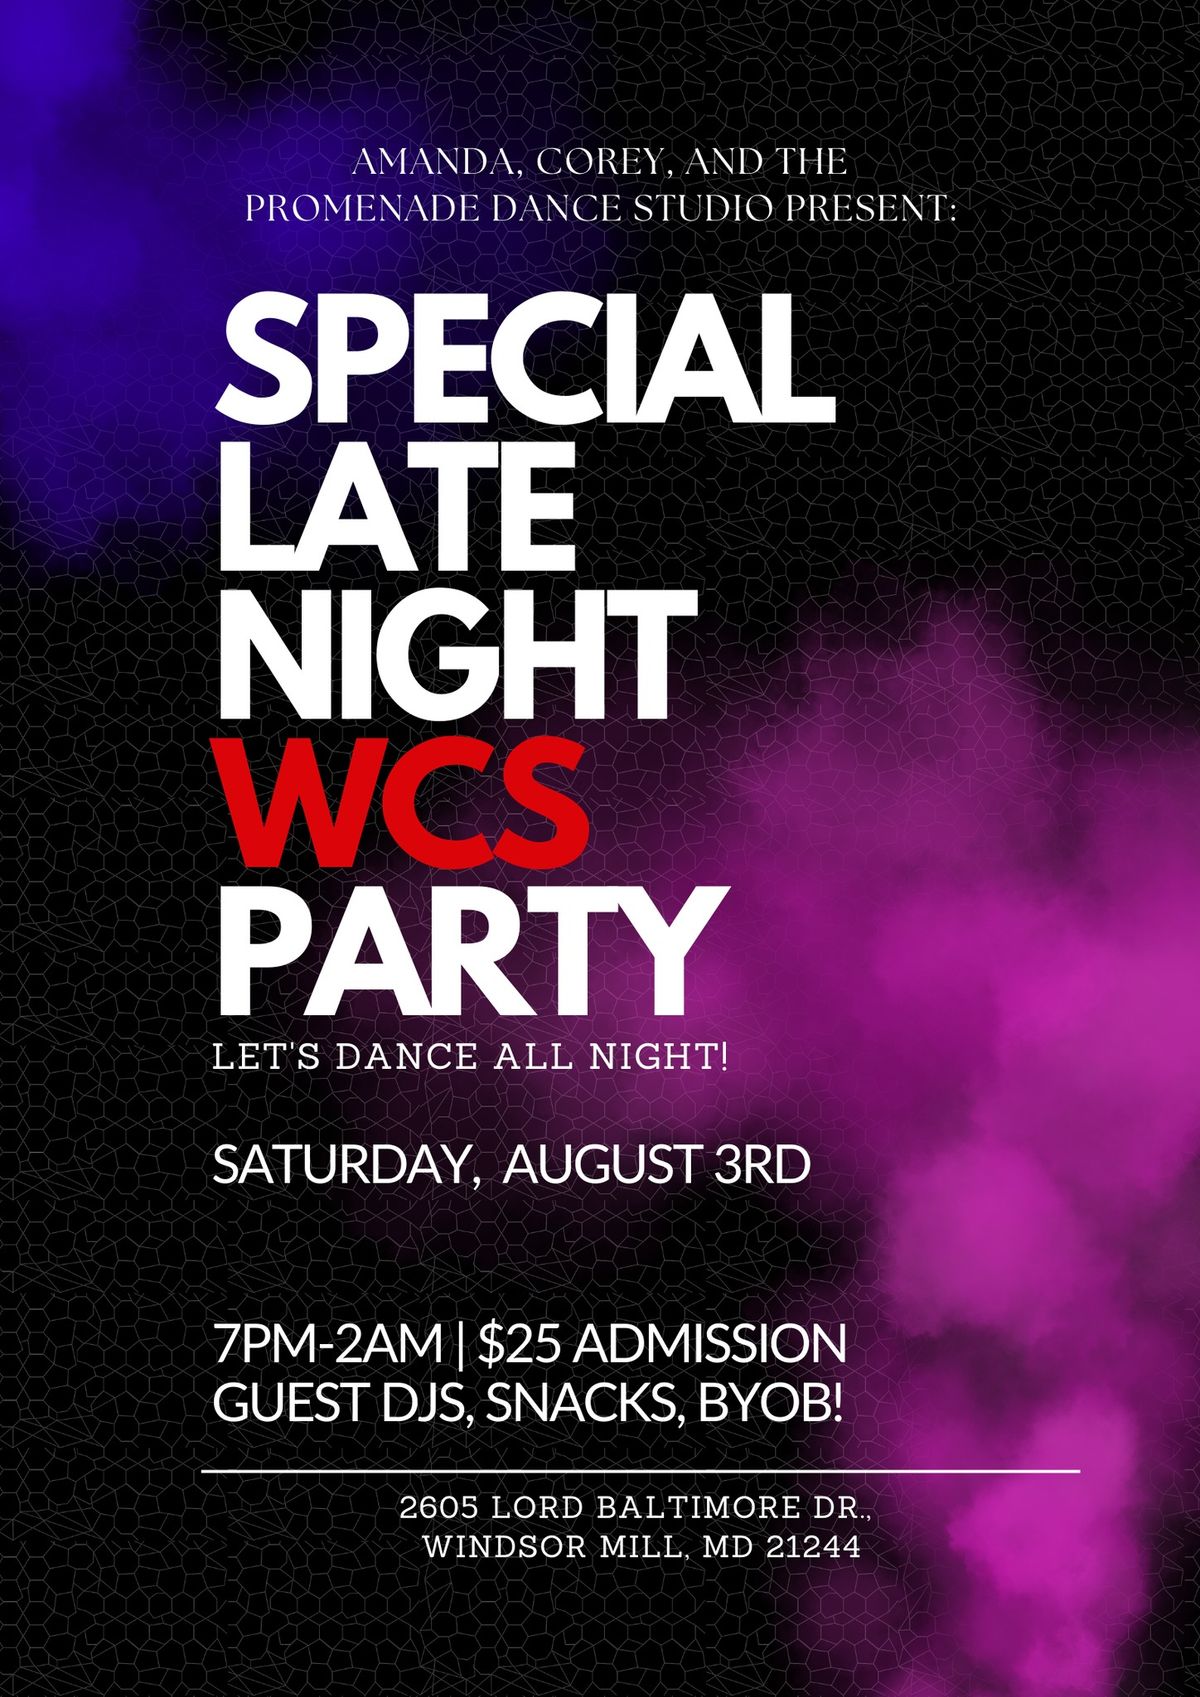 Late Night WCS Party at The Promenade!!